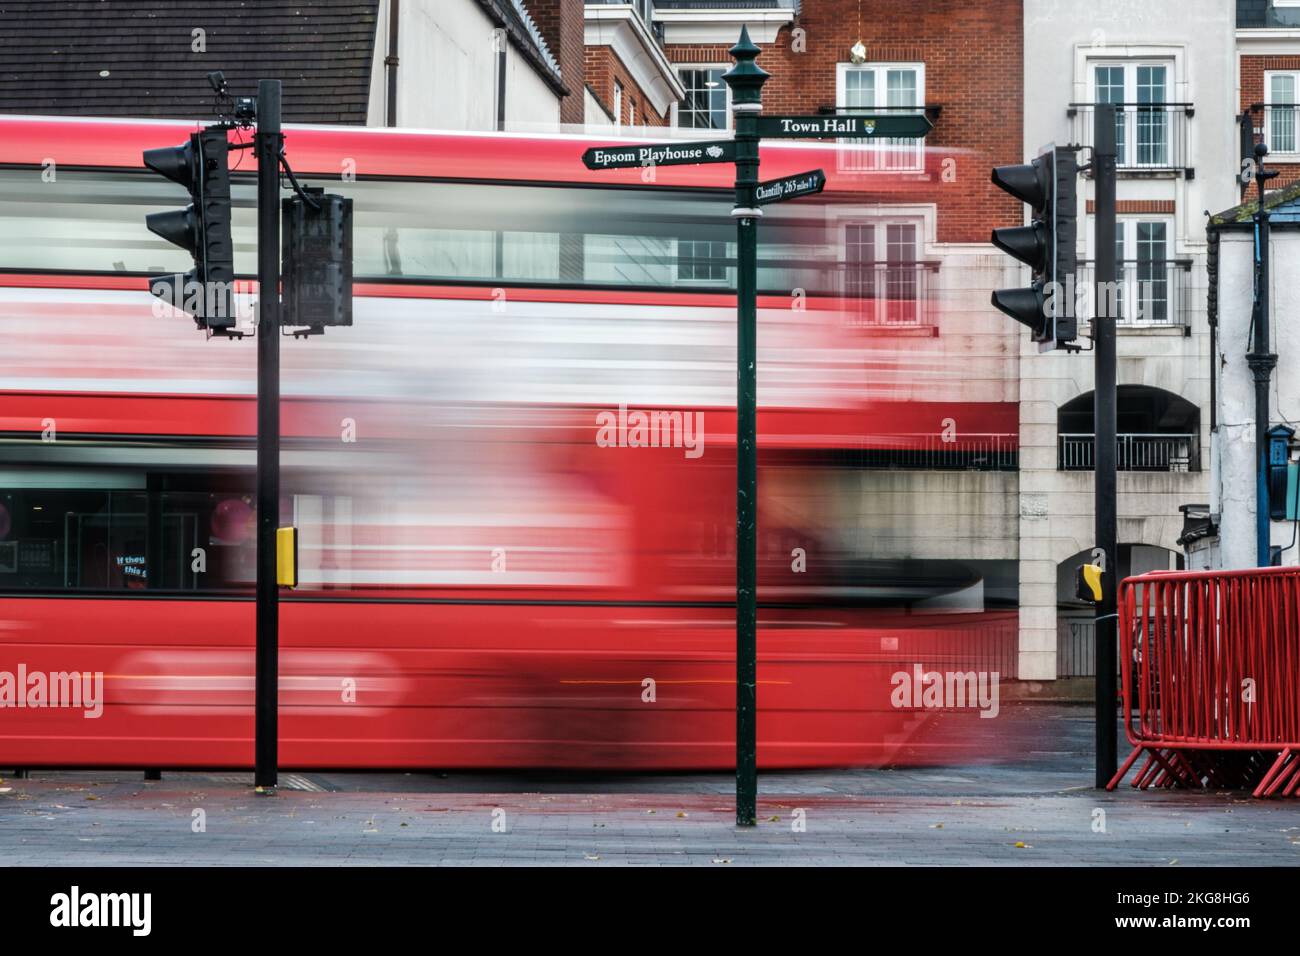 Epsom, Surrey, London UK, November 20 2022, Surrealistic Image Of A Public Transport Bus Passing Traffic Lights On A Main Road With blurred Motion Ind Stock Photo